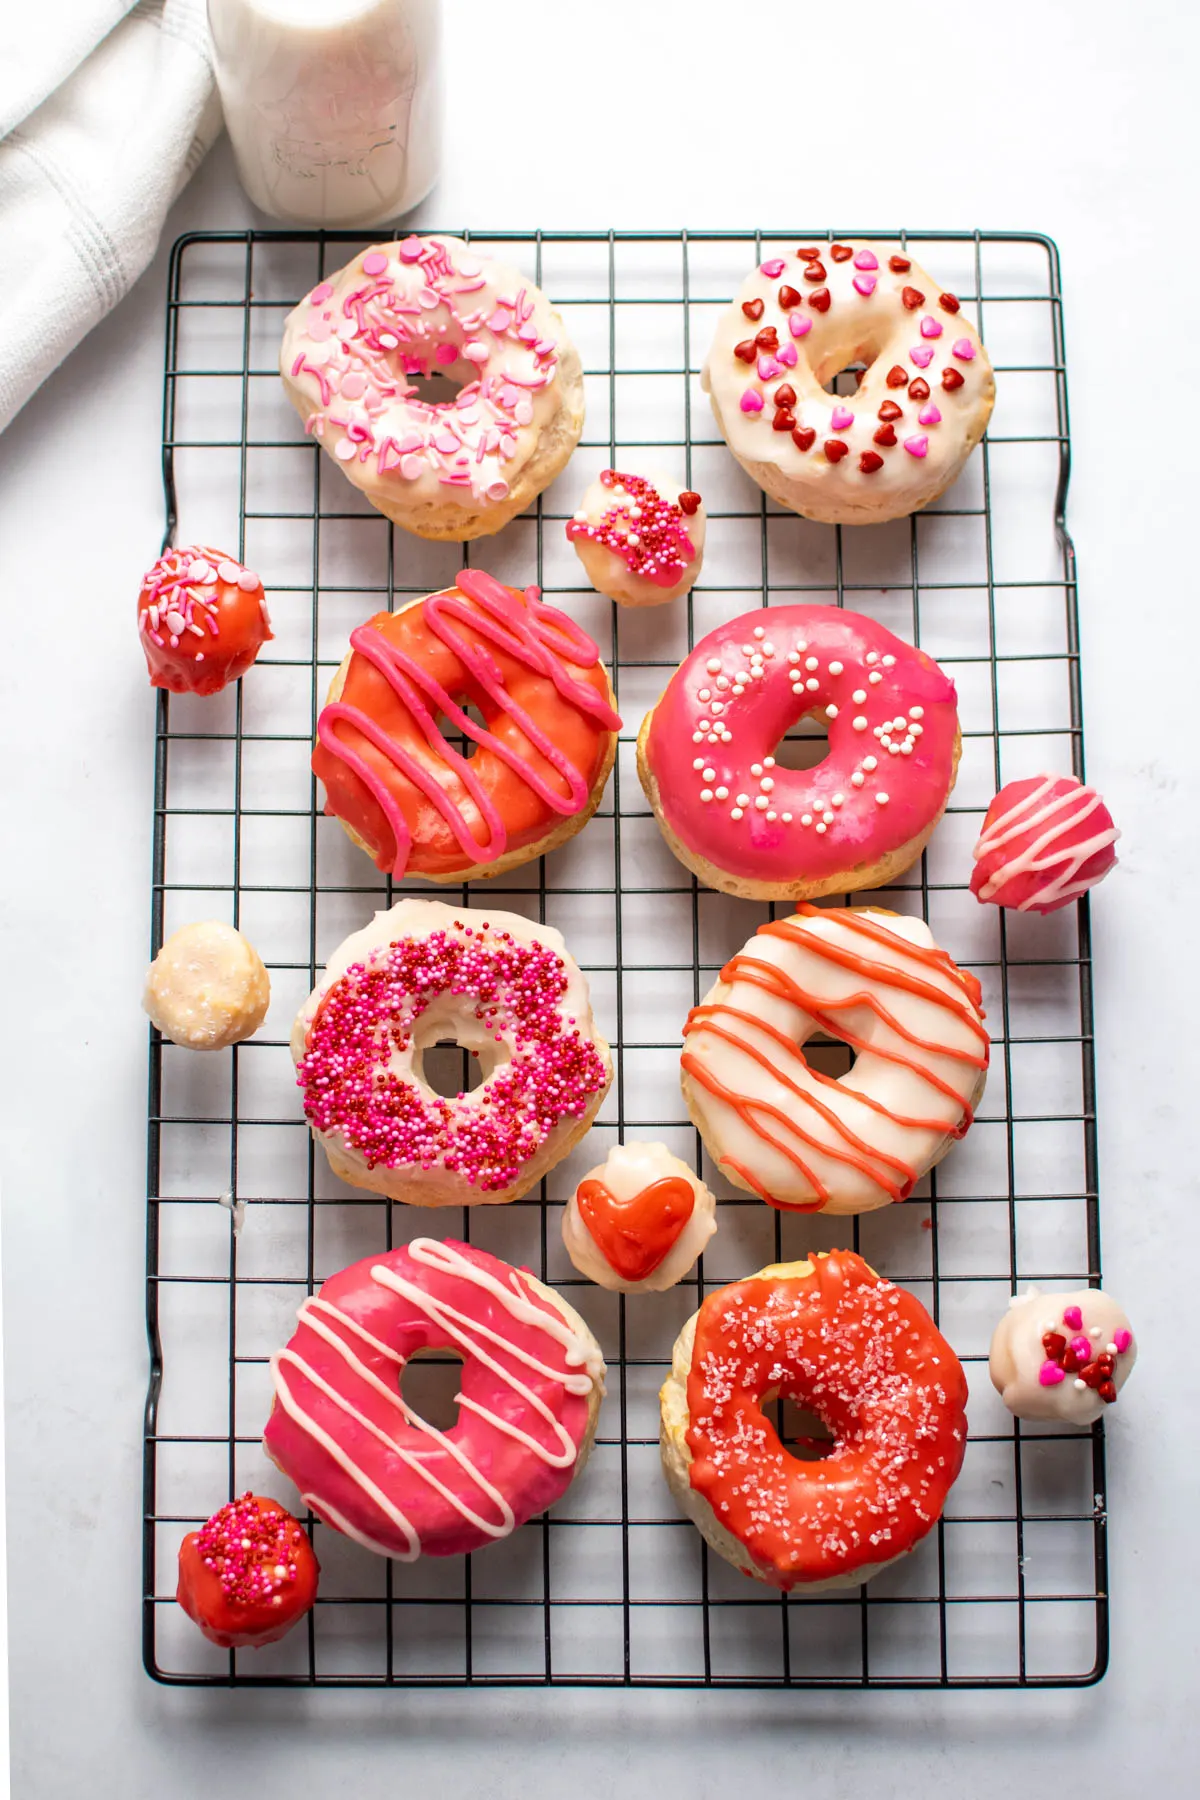 Several decorated Valentine's Day donuts and donut holes on black baking rack that's sitting on quartz countertop.